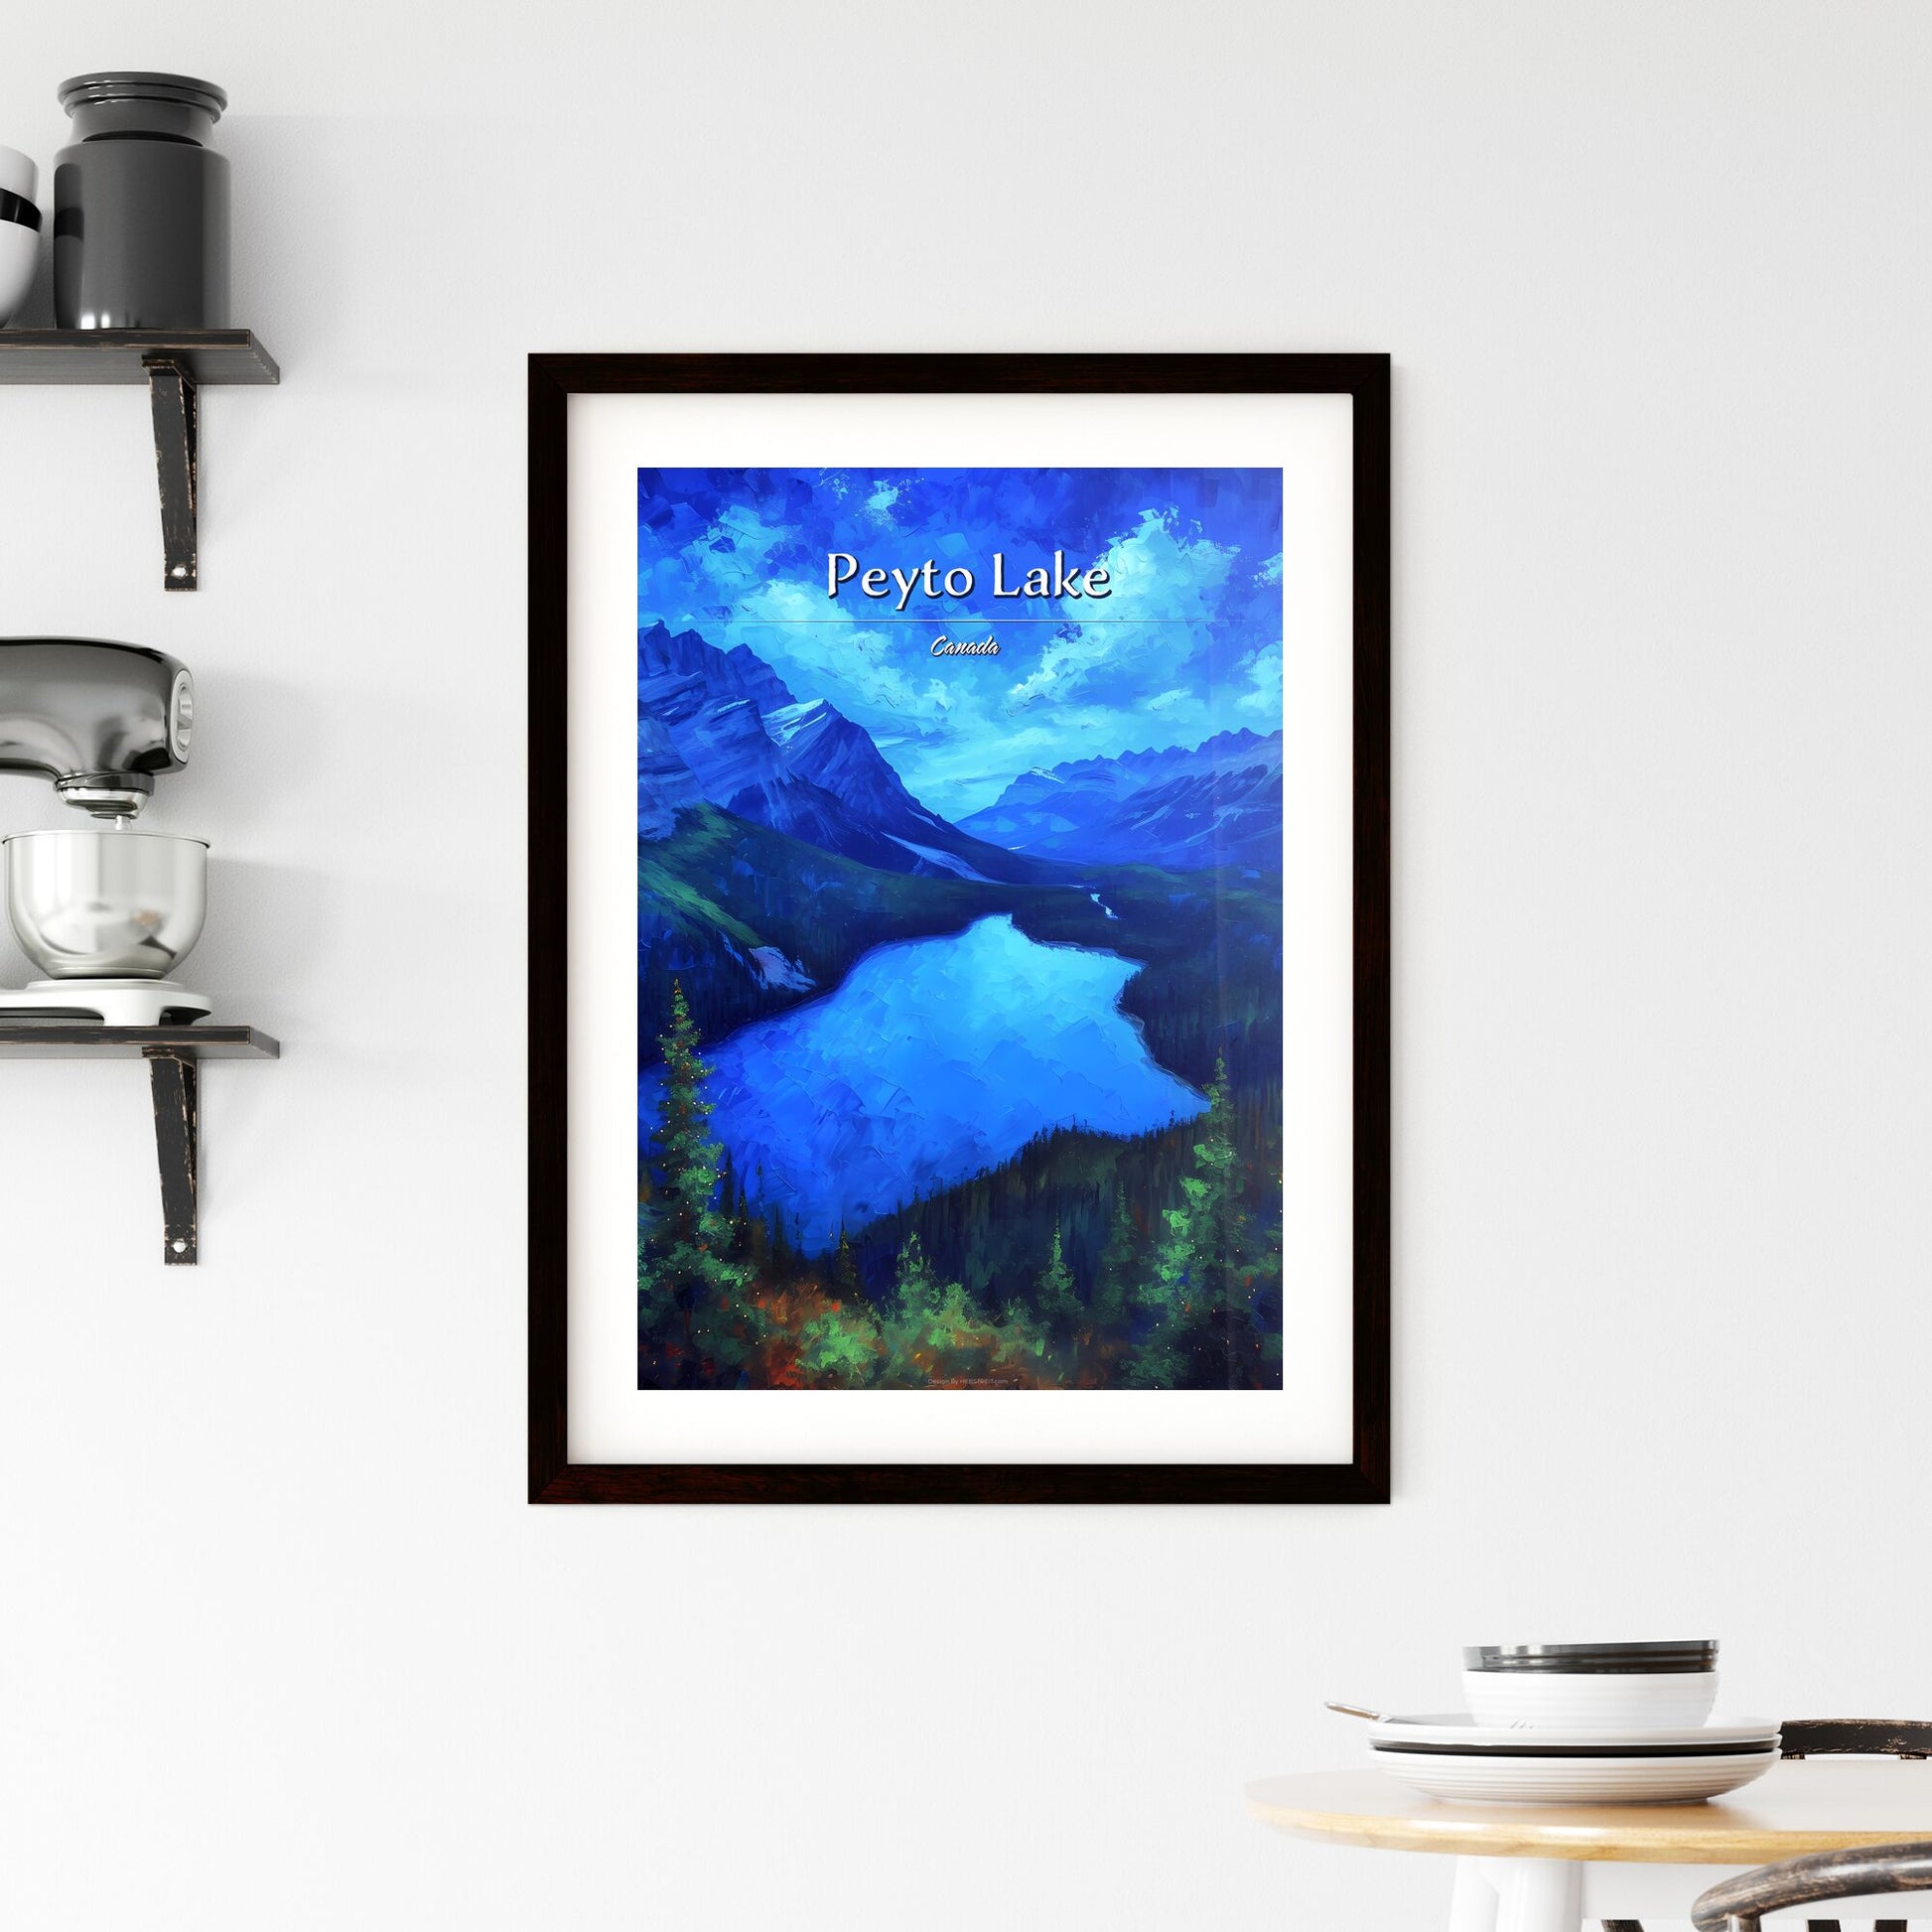 Peyto Lake, Canada - Art print of a lake surrounded by mountains Default Title